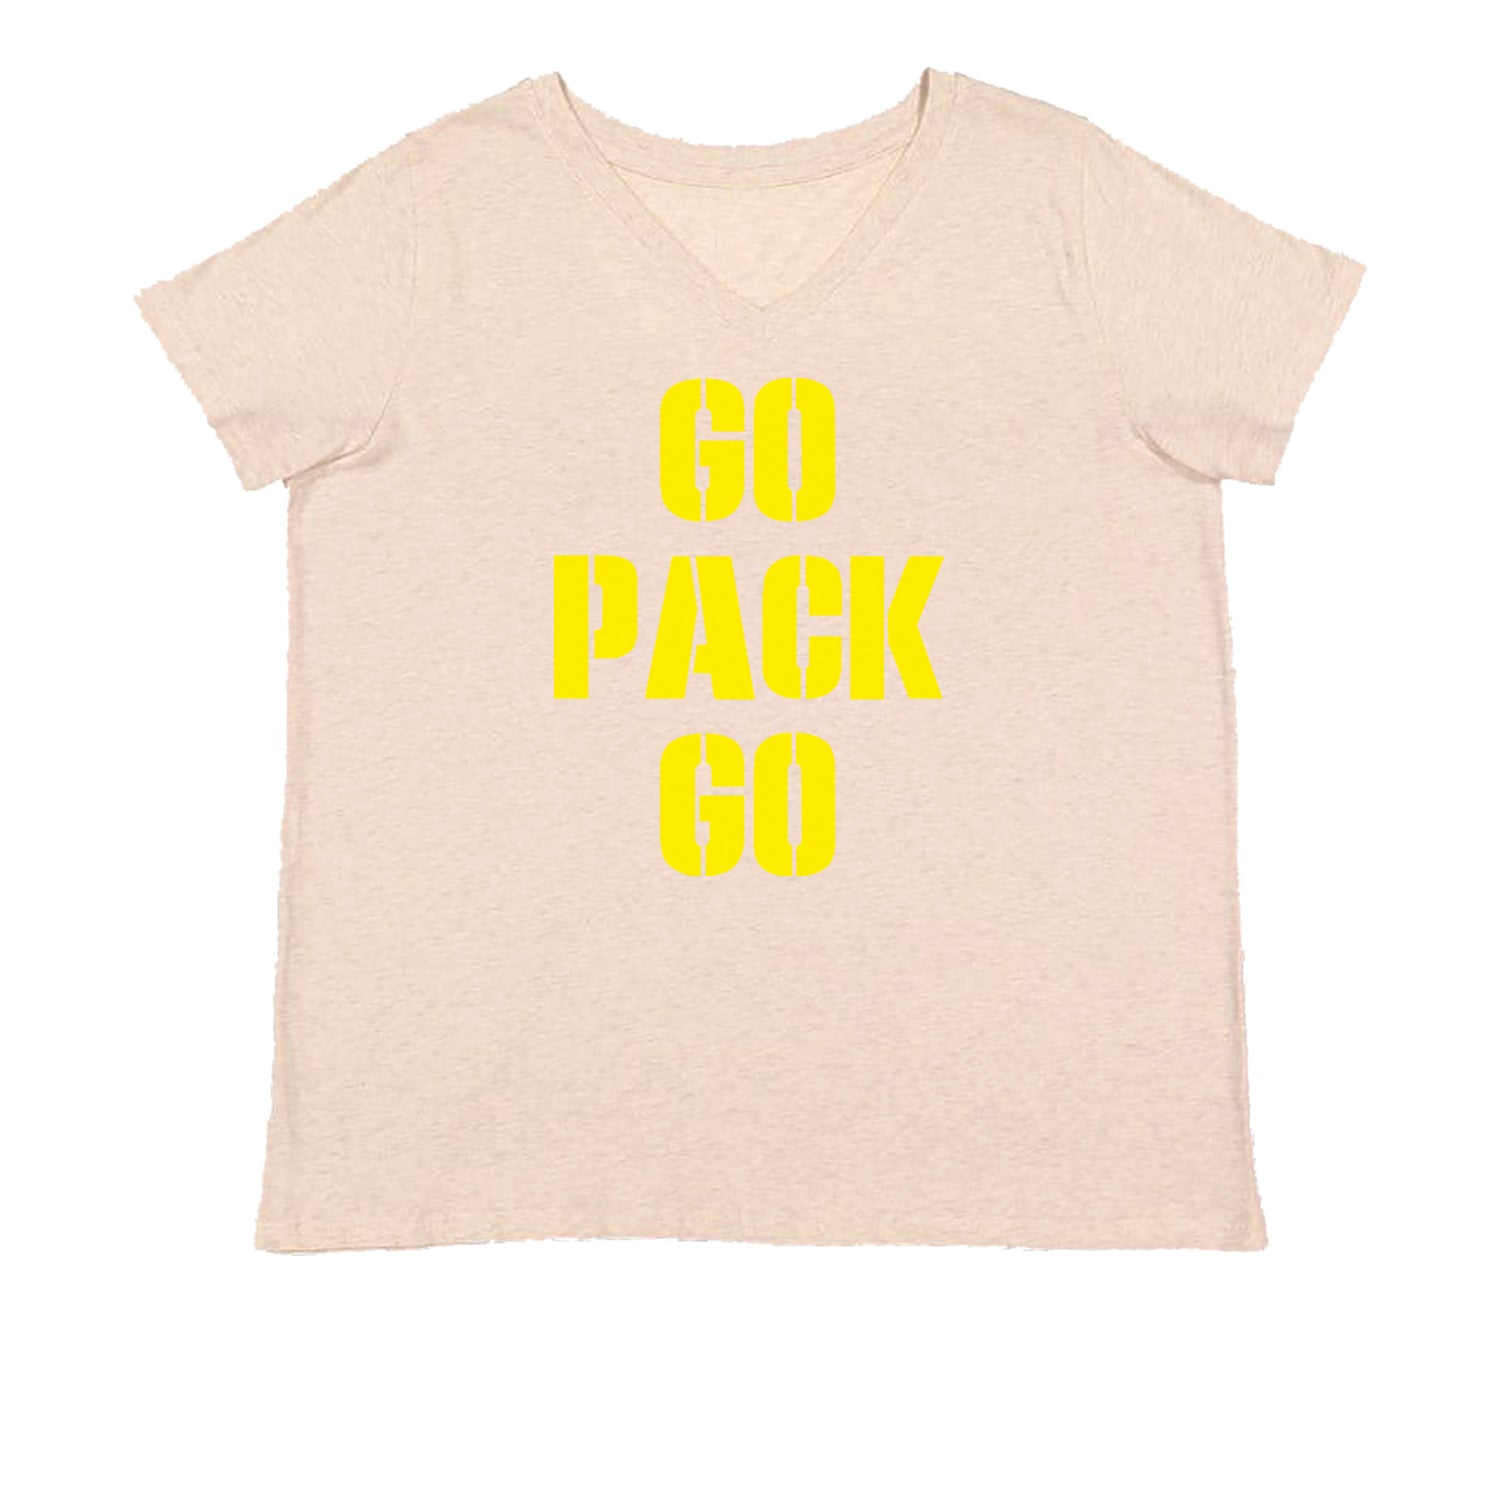 Go Pack Go Green Bay Womens Plus Size V-Neck T-shirt football, greenbay, packer by Expression Tees